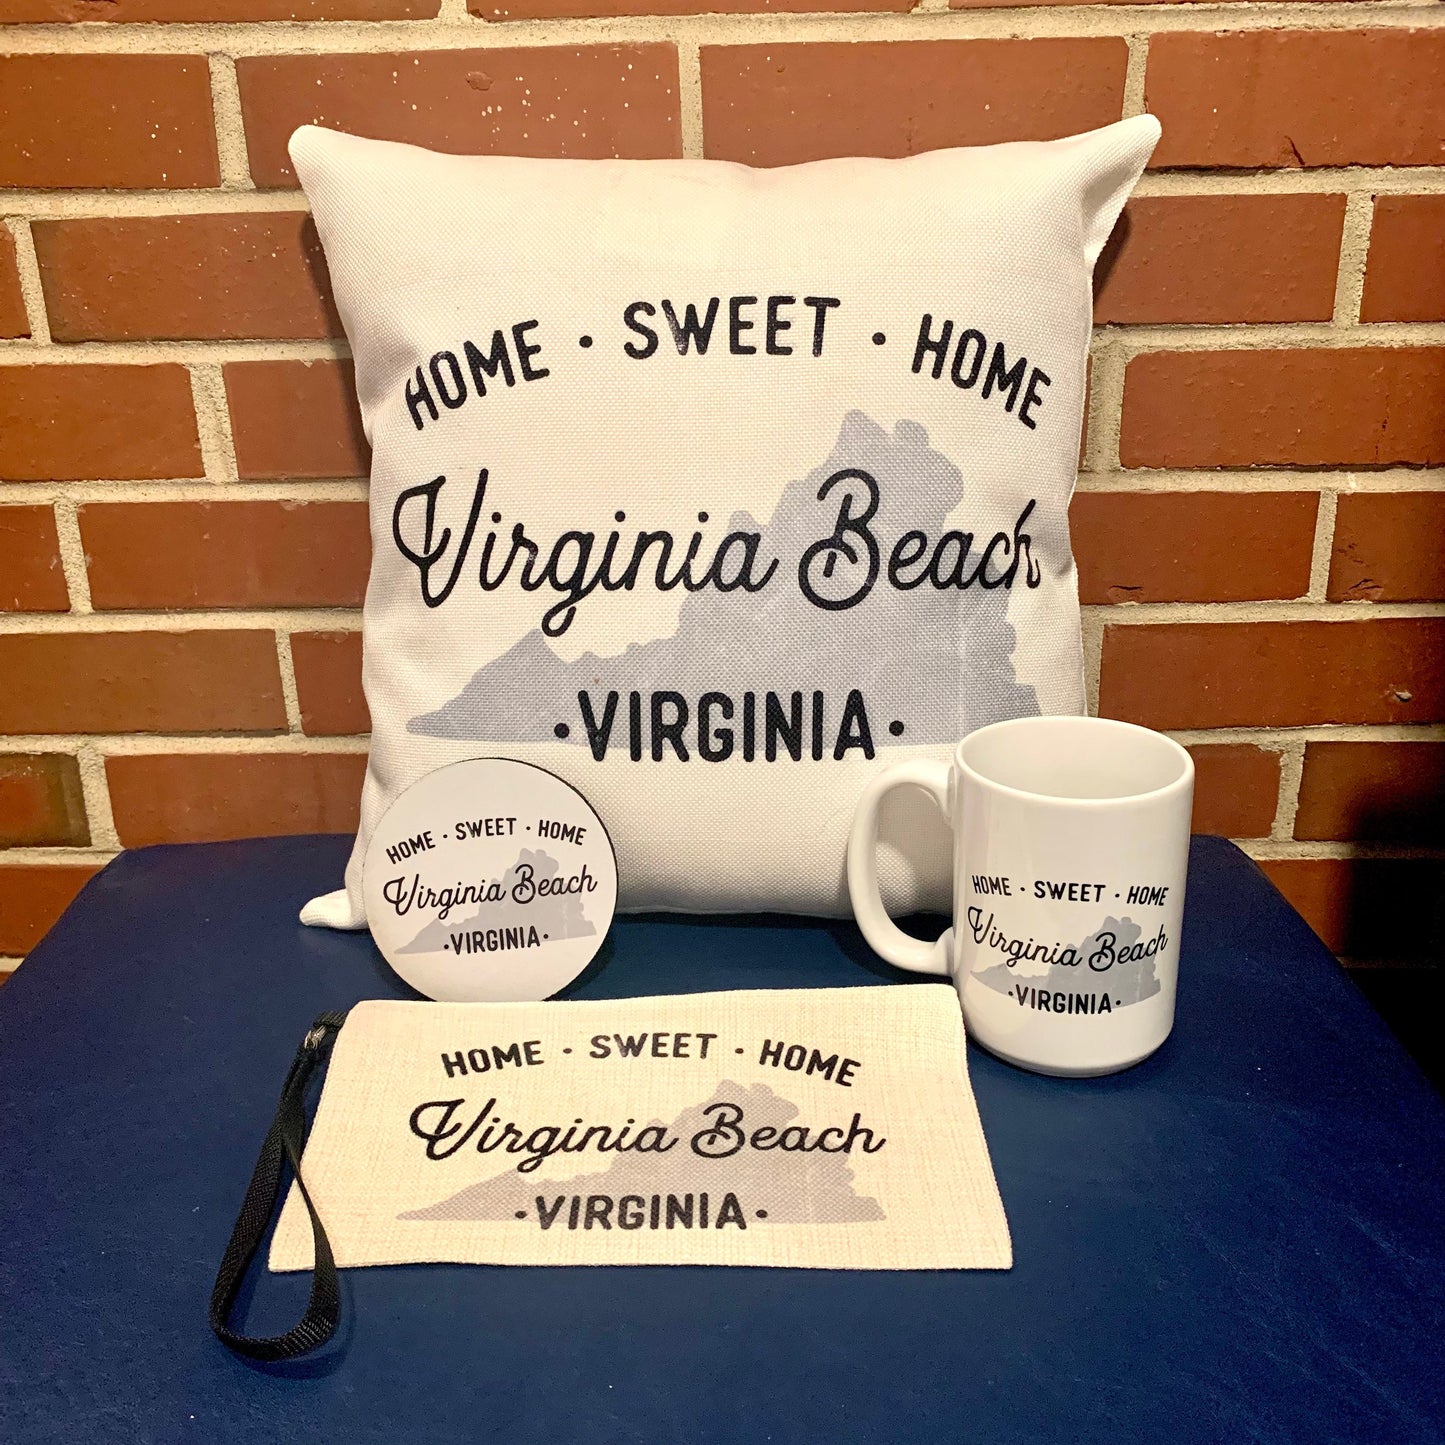 Virginia Beach Home Sweet Home Rubber Drink Coaster, set of 4